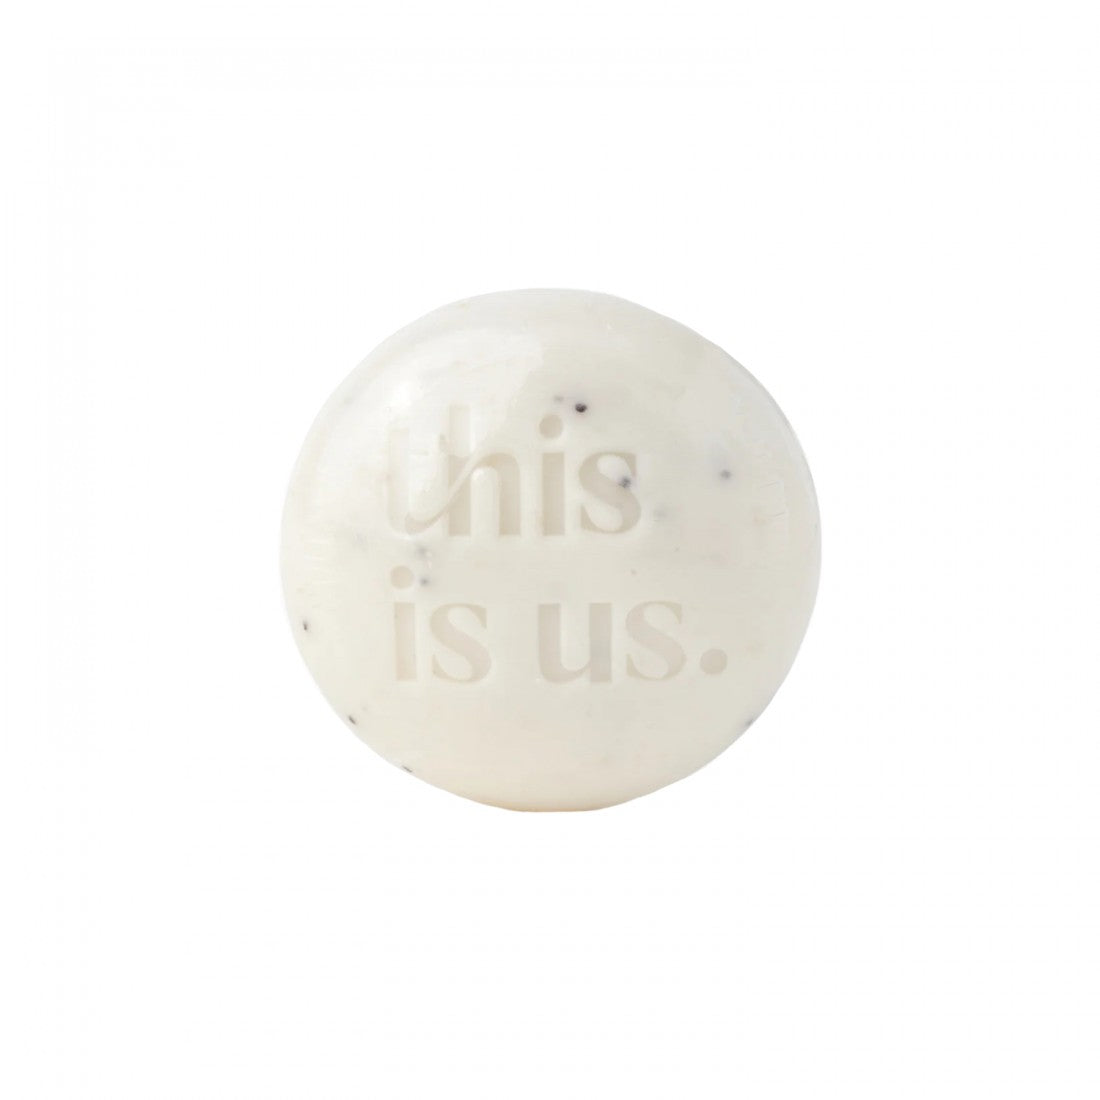 this is us. | This is soap - Scrub Soap Bar